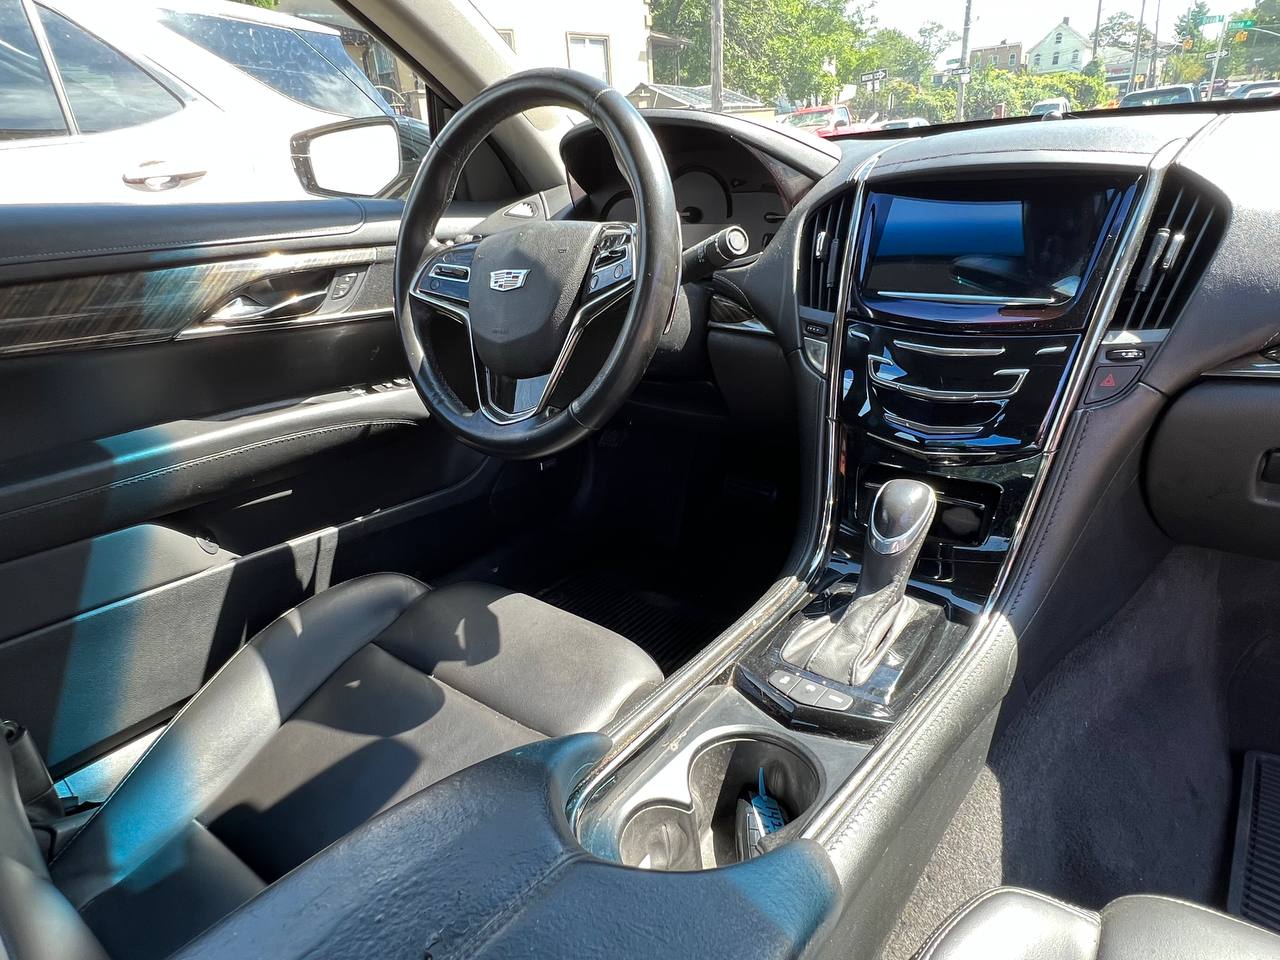 Used - Cadillac ATS 2.0T Coupe for sale in Staten Island NY